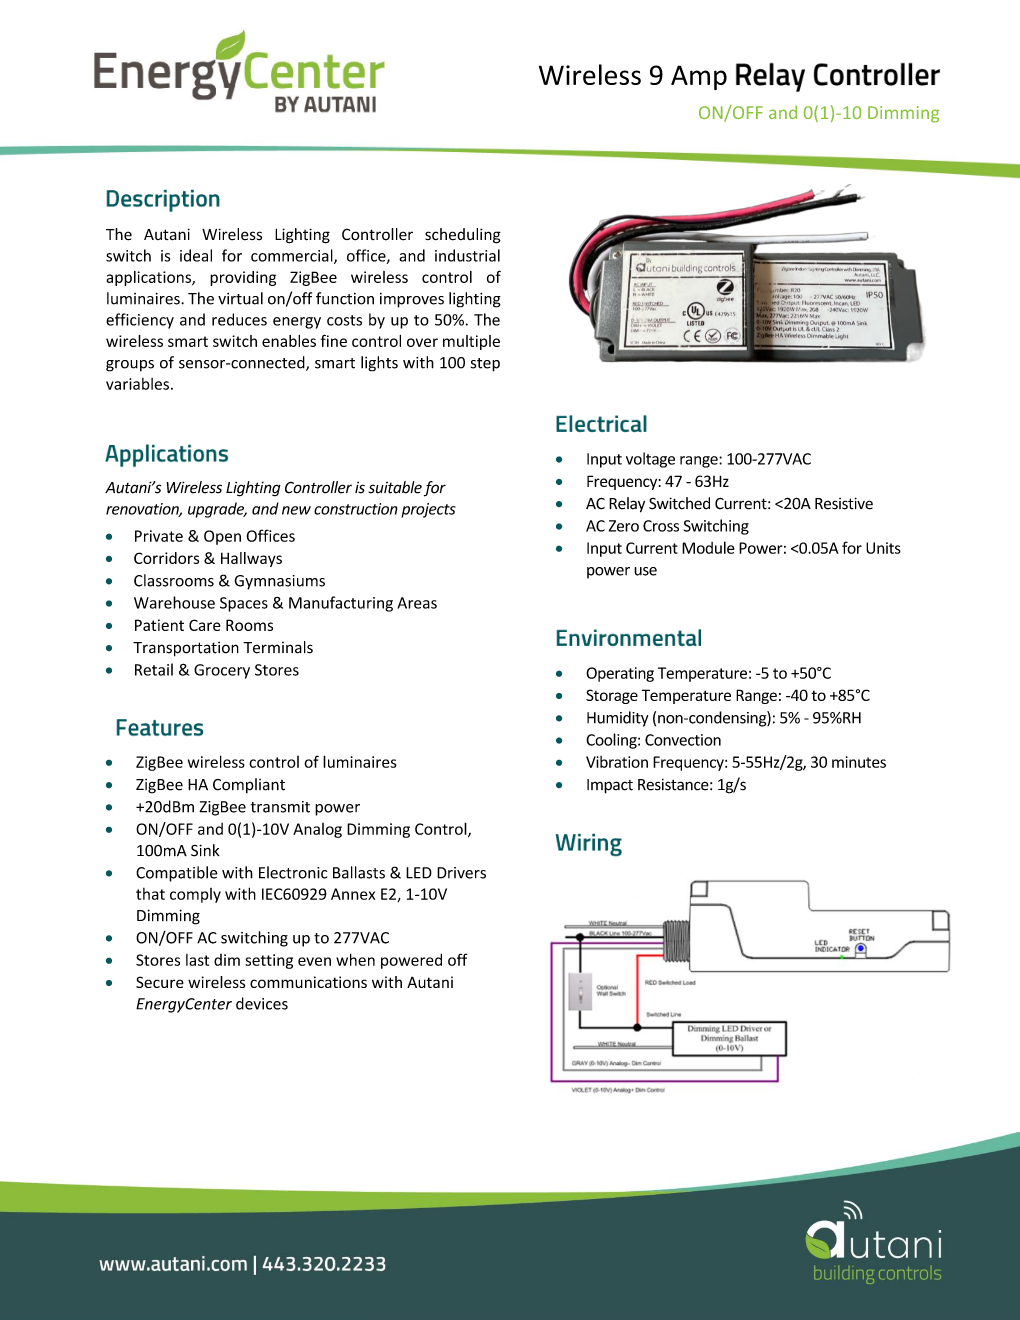 AUTANI_WIRELESS_9AMP_RELAY_CONTROLLER_20220719_Page_001.png